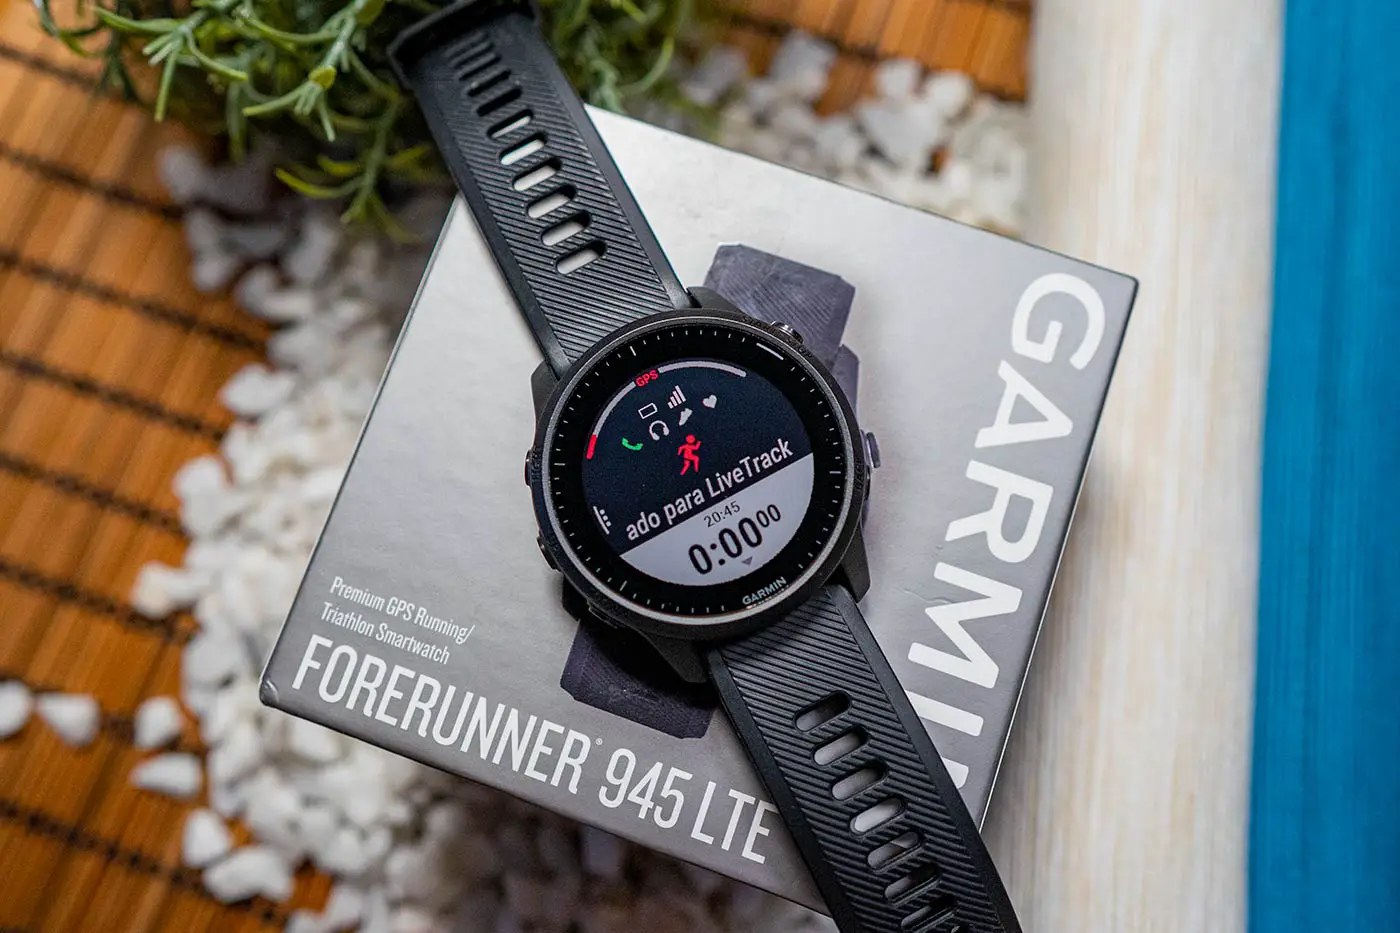 GARMIN 945 LTE | Review, and